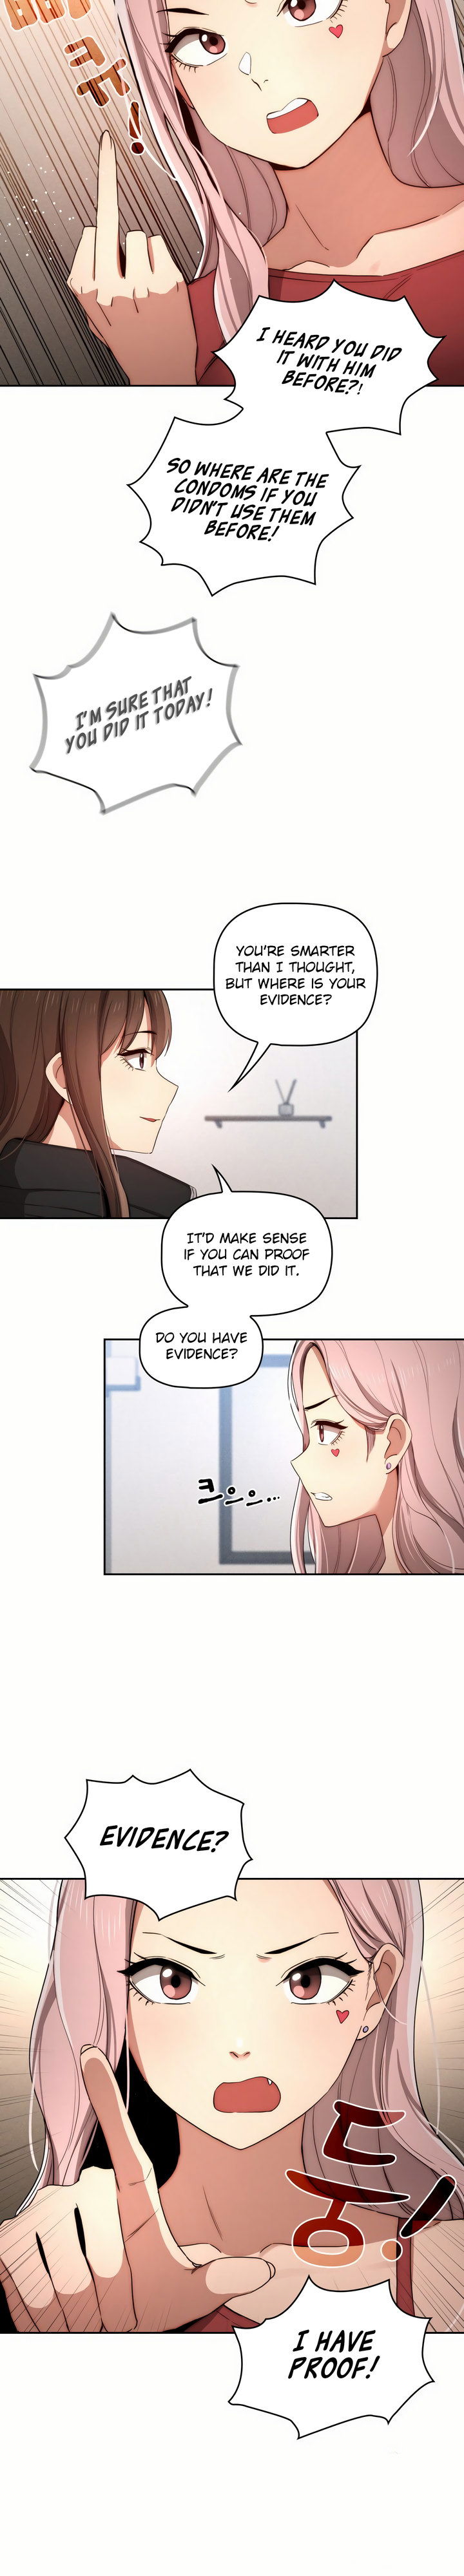 private-tutoring-in-these-trying-times-chap-34-2